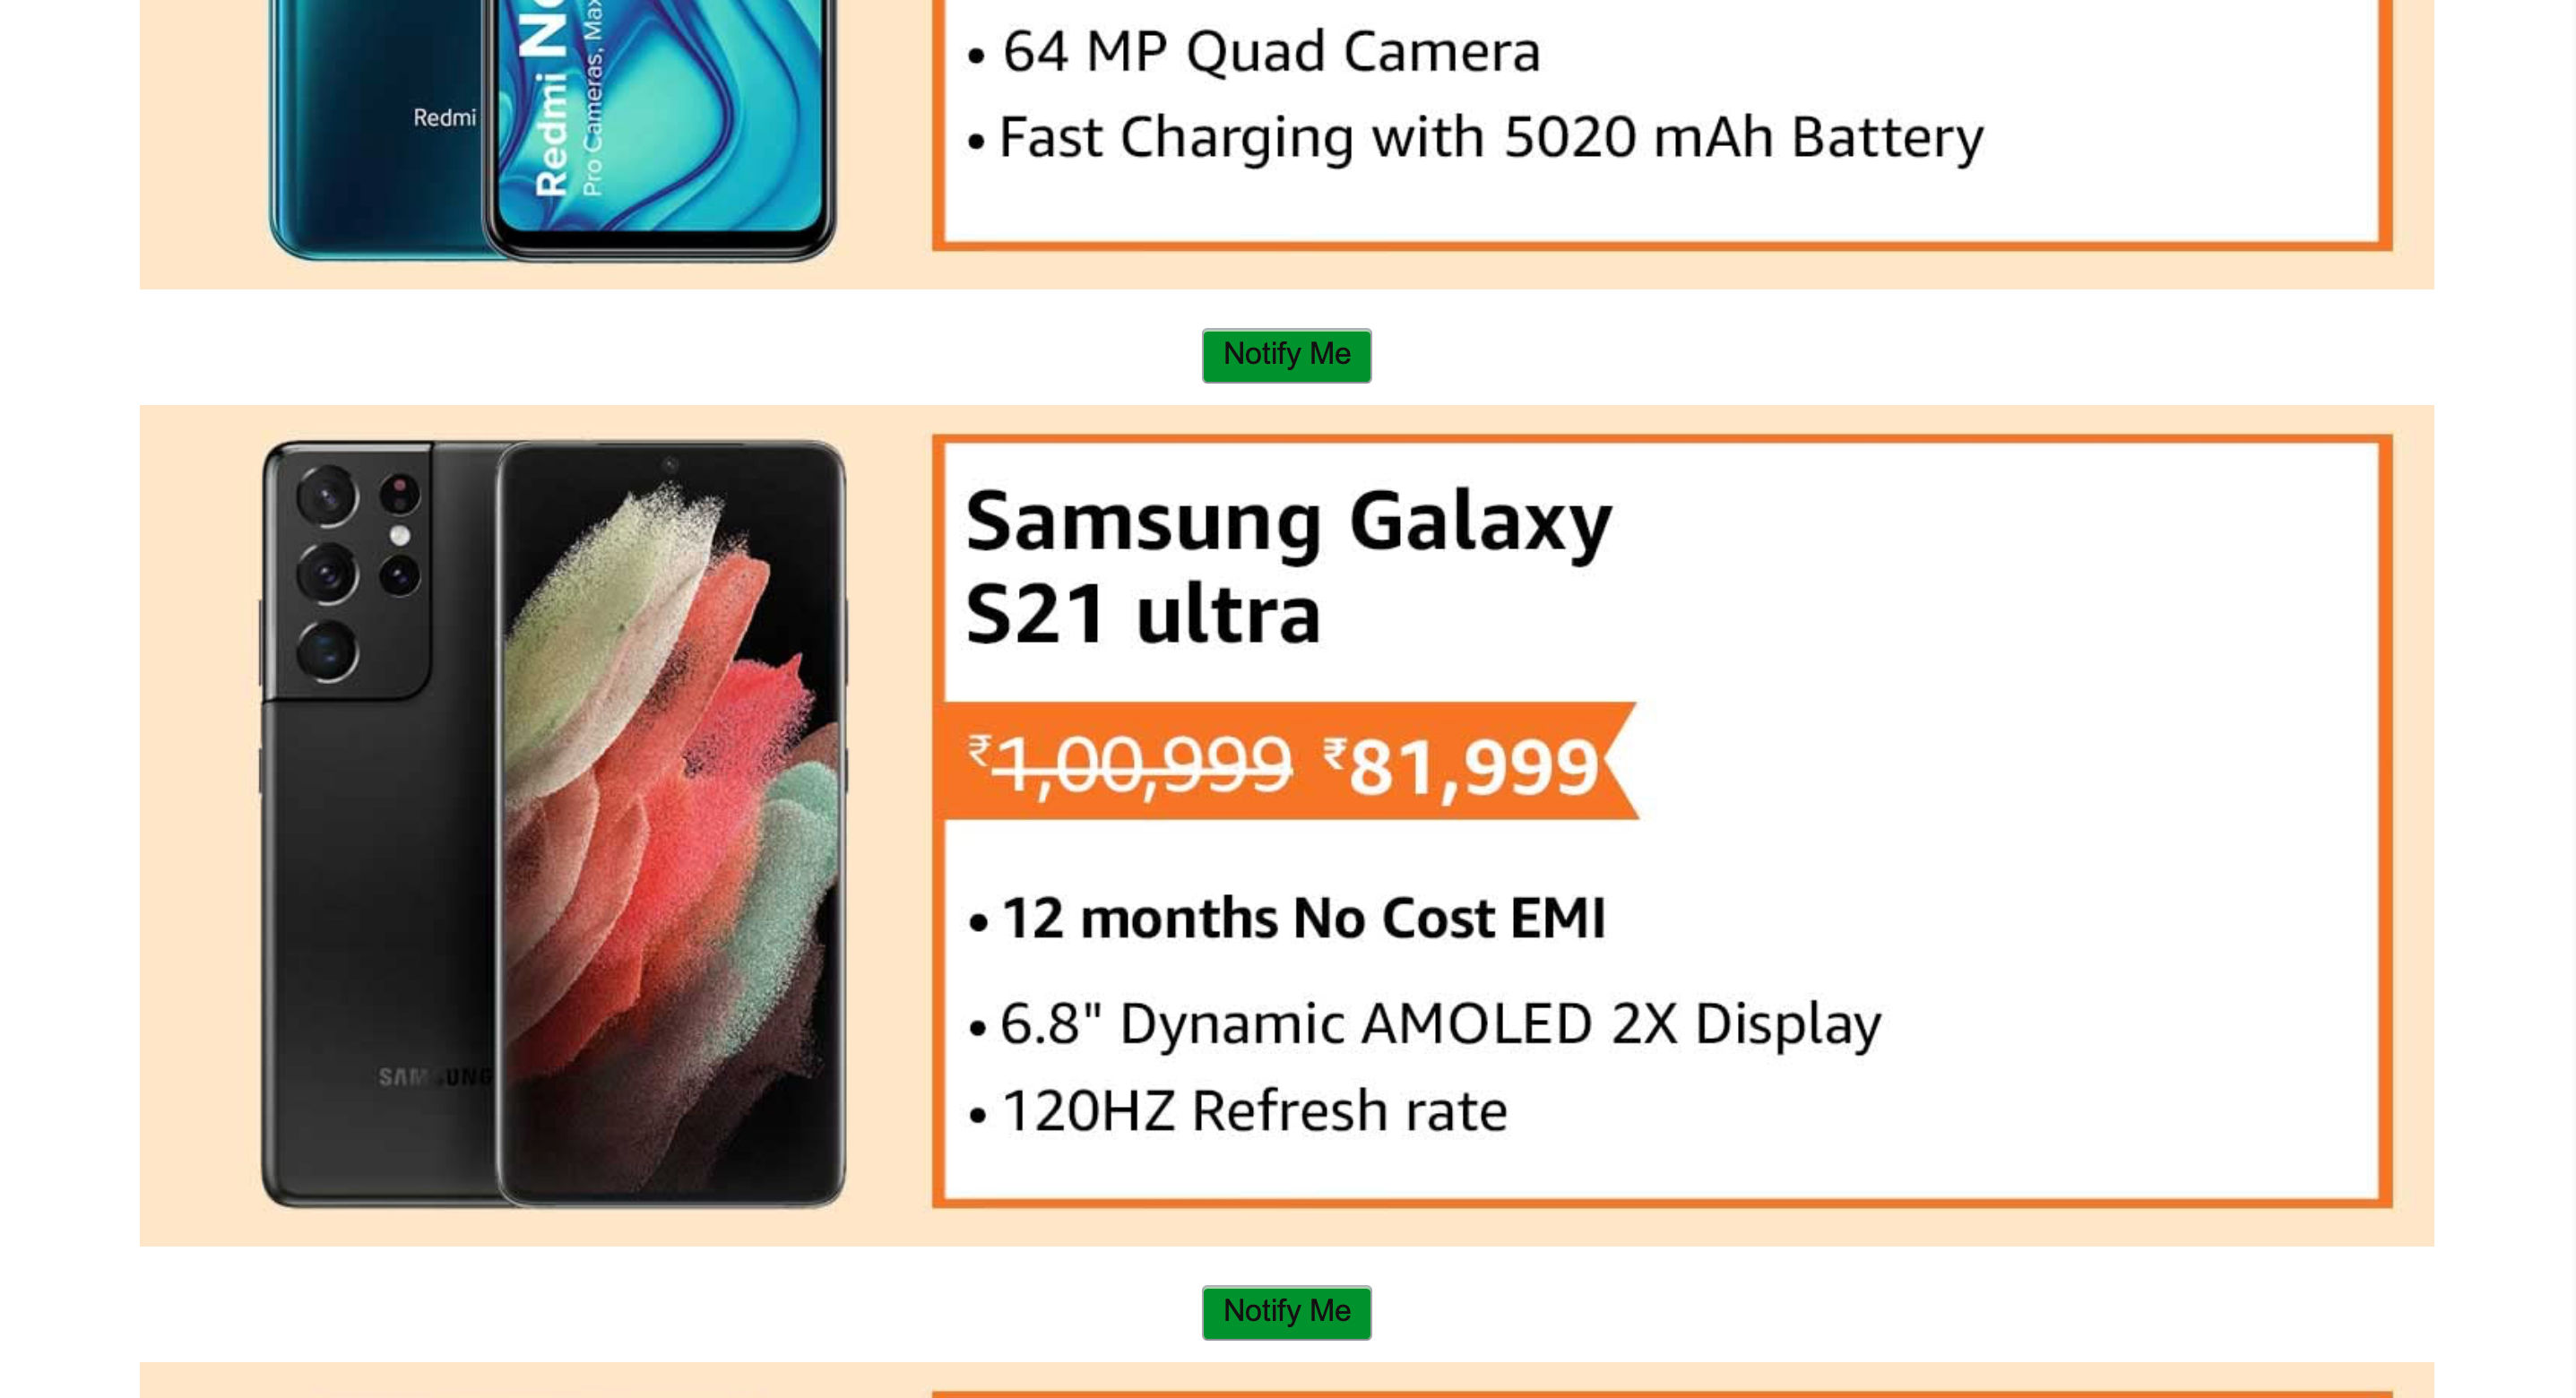 Samsung Galaxy S21 Ultra Price In India Discounted On Amazon Here S How Much You Can Get It For Mysmartprice